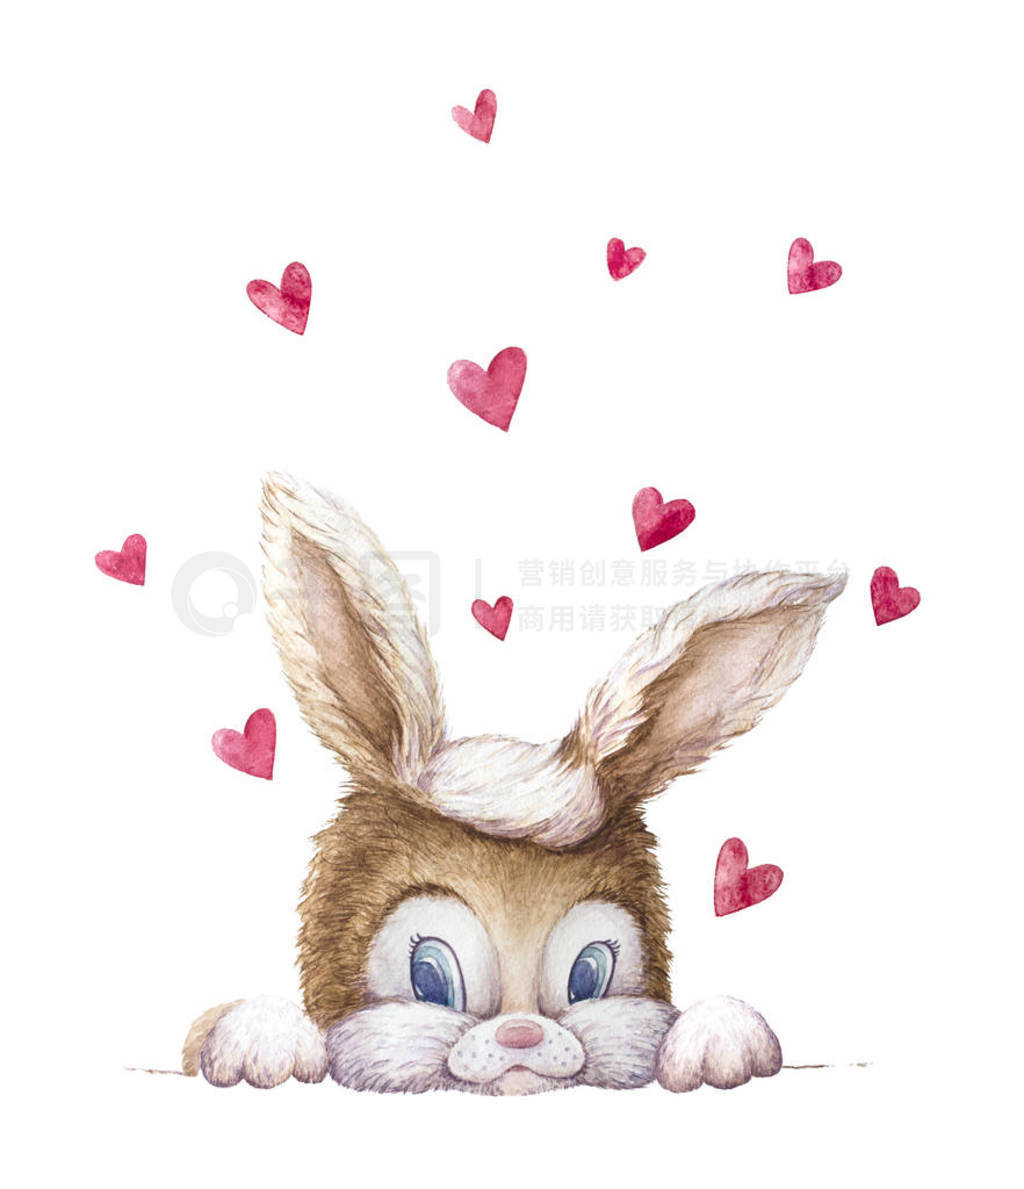 Cute Bunny. Kids personage. Hearts flying. White background. New